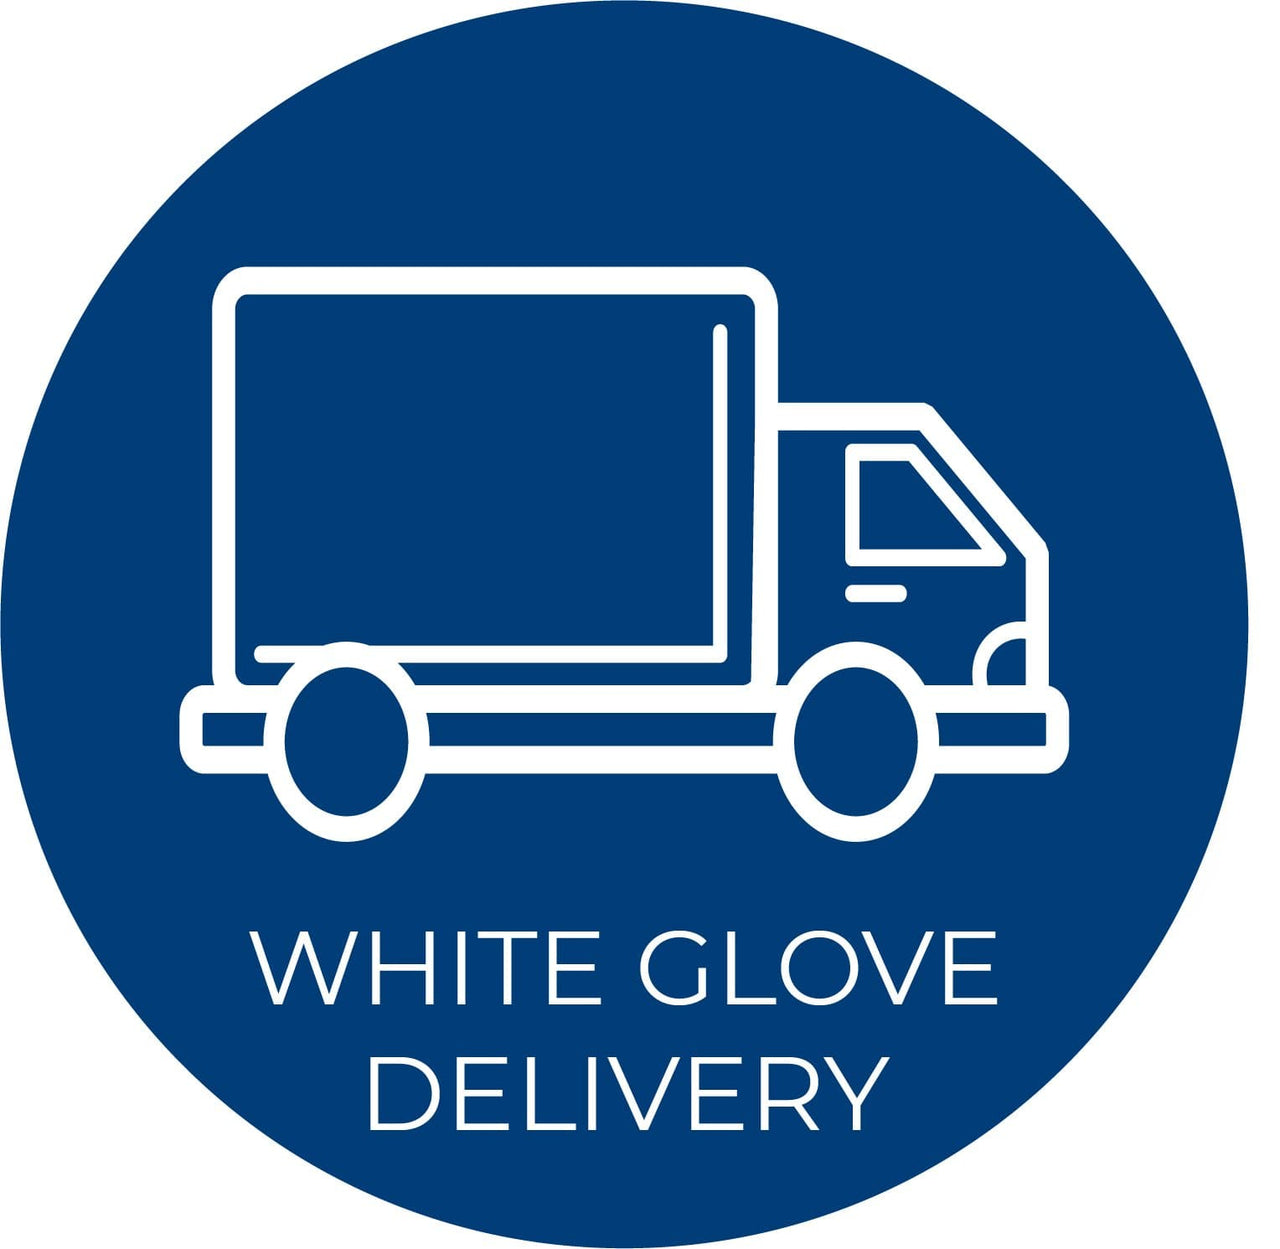 White Glove Delivery Service - Invacare Bed Packages - Senior.com White Glove Services